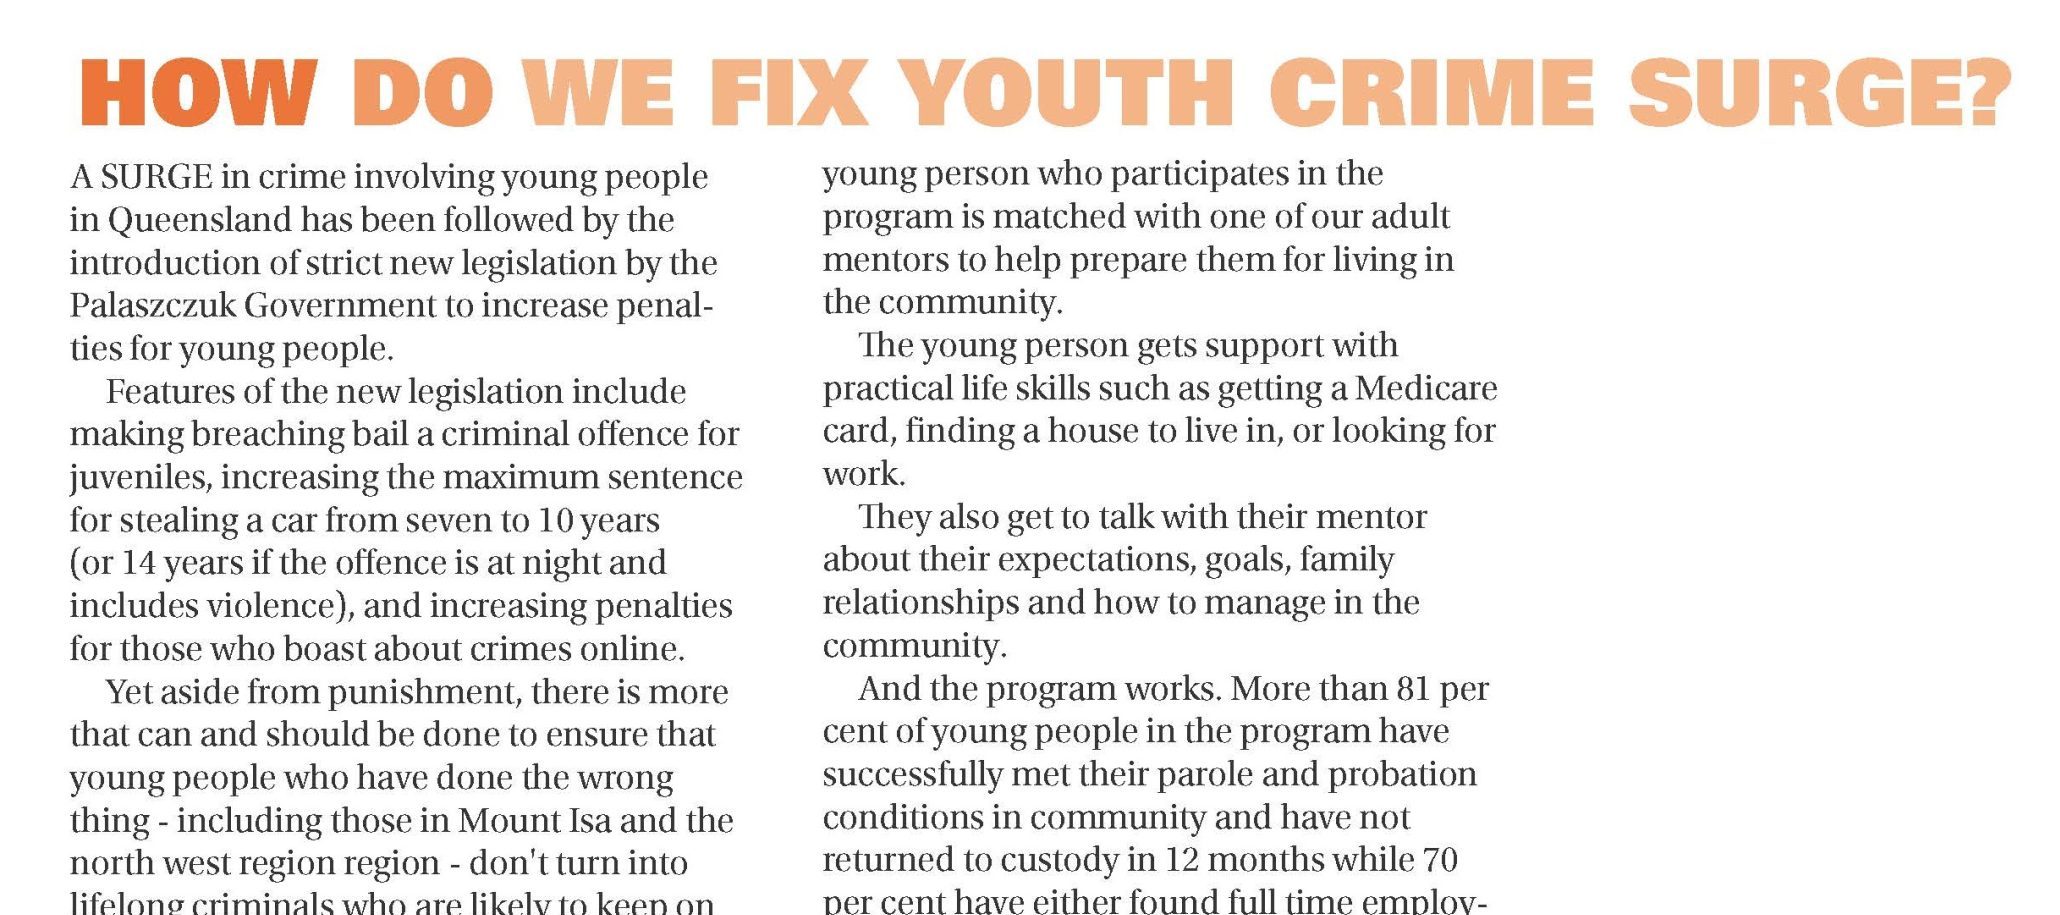 There’s a better solution: SHINE’s CEO on youth crime in Qld